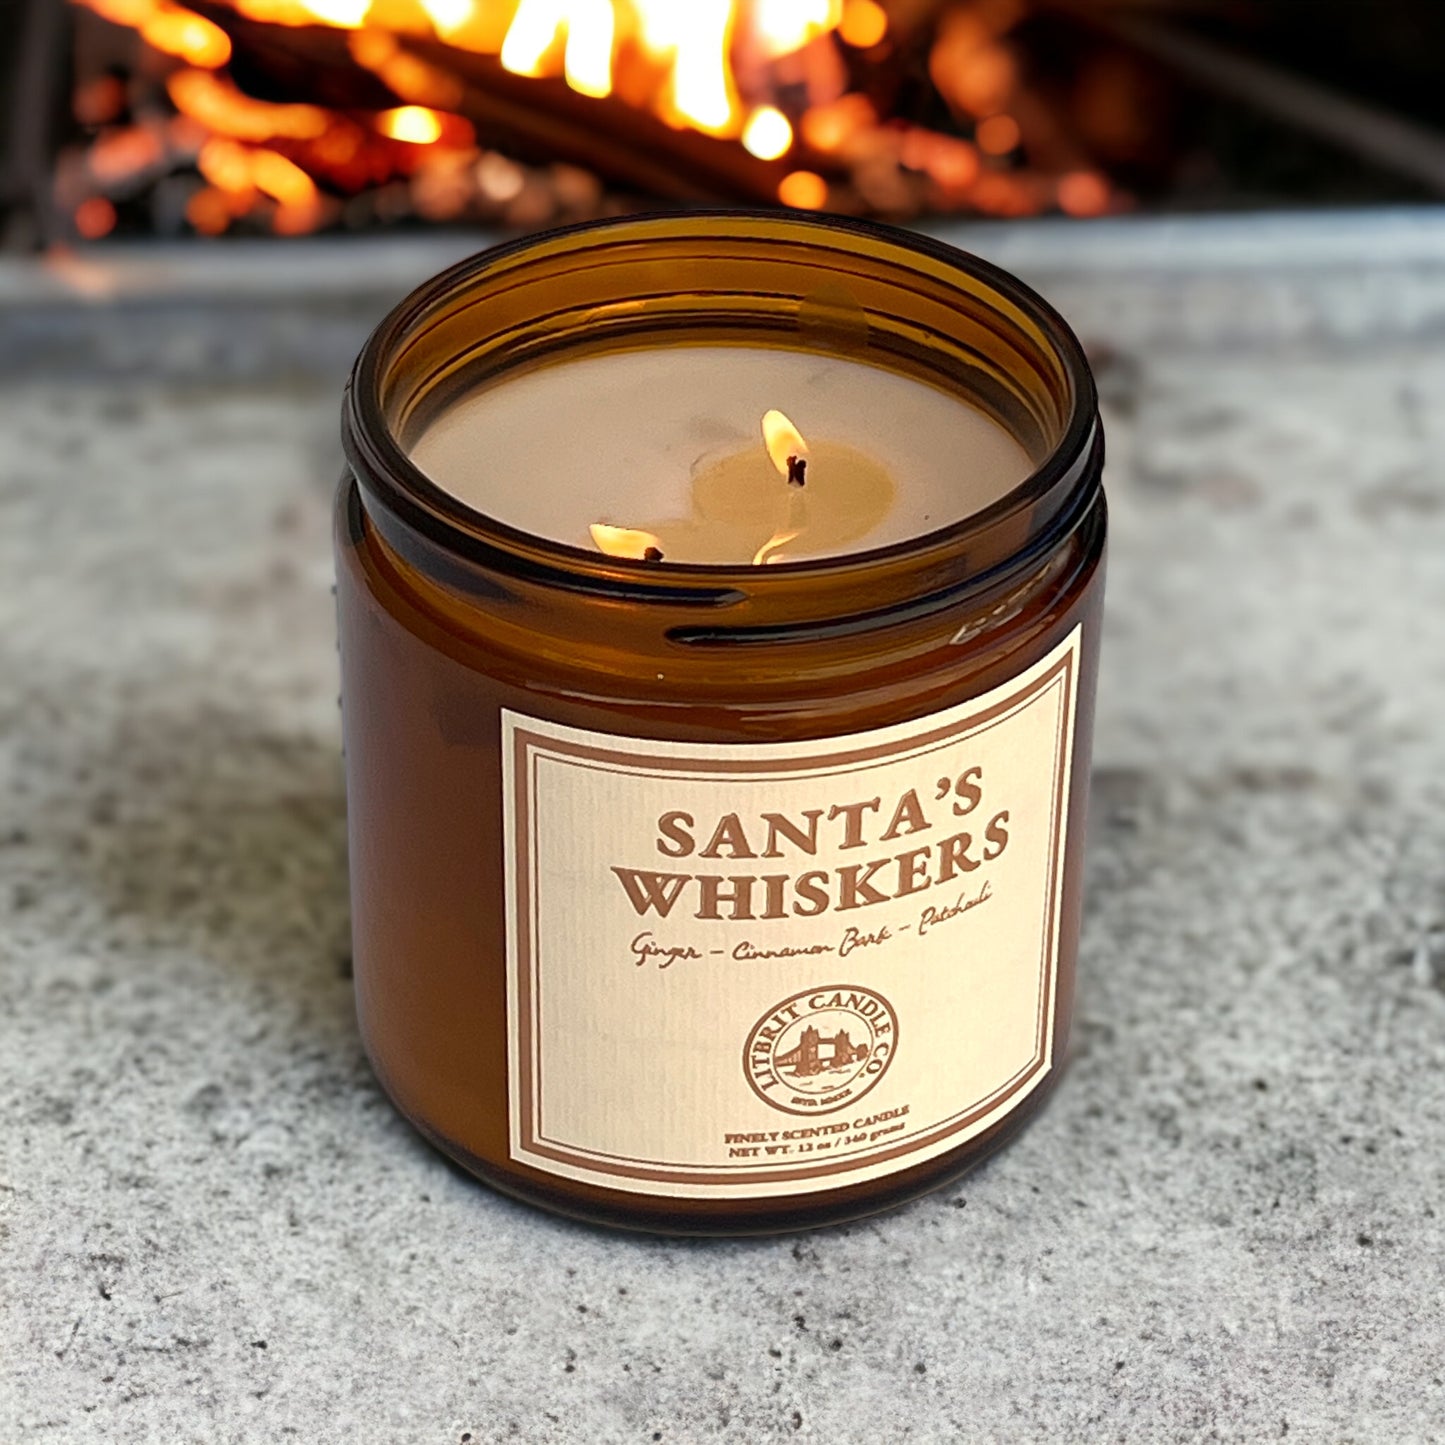 Santa's Whiskers Candle